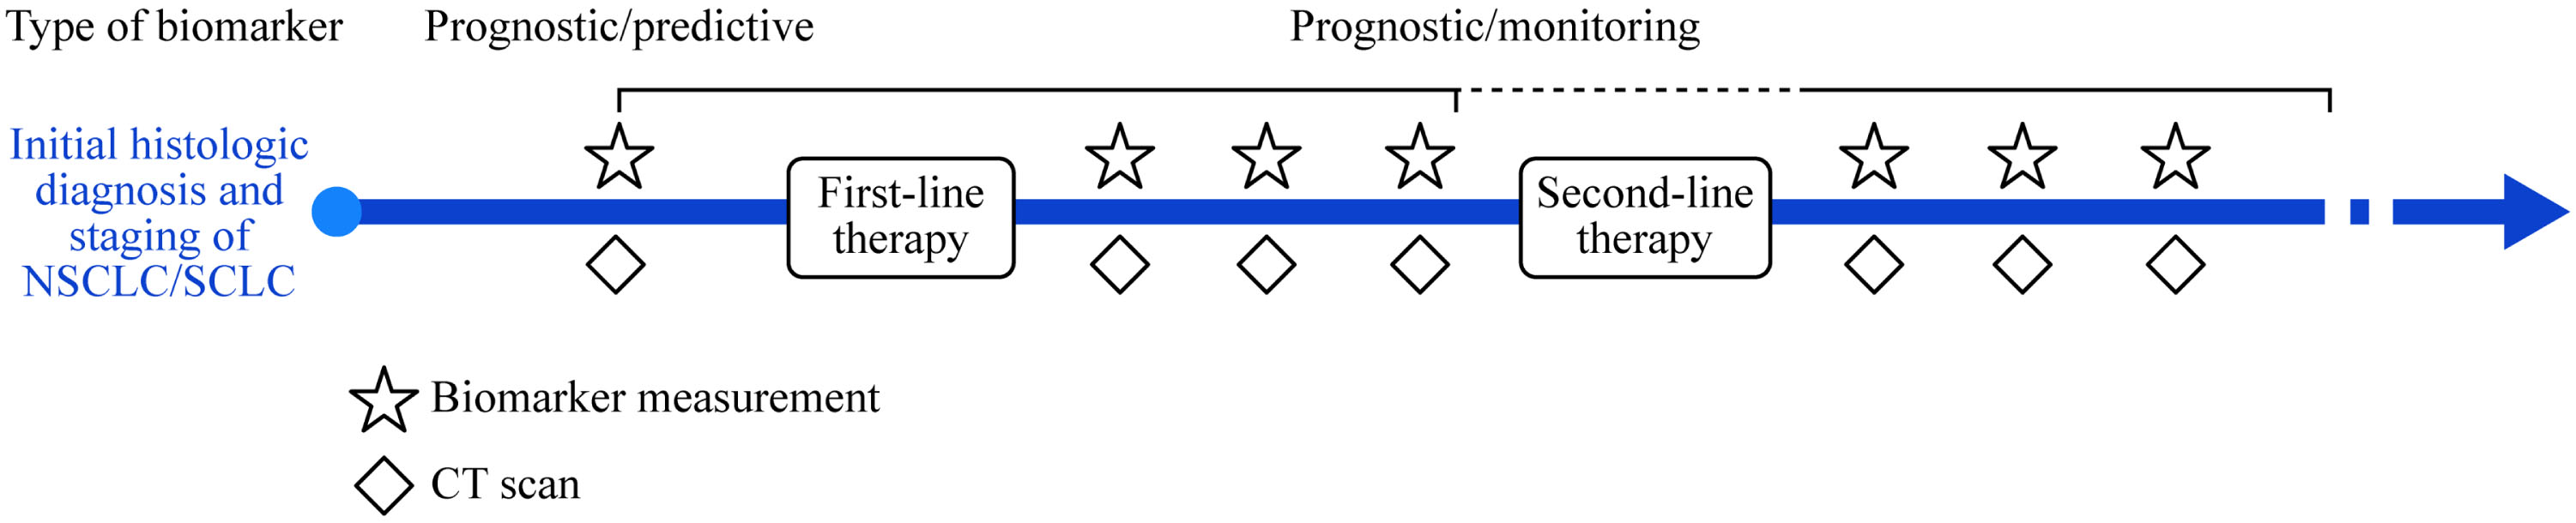 Summary of predictive, prognostic, and monitoring STMs for lung cancer. Biomarkers may have multiple clinical applications during the course of the disease, depending on the timing of the test and the exact measurements and comparisons that are to be made. The arrow represents the time from initial histologic diagnosis and staging in arbitrary units. CT: computed tomography, NSCLC: non-small cell lung cancer, SCLC: small cell lung cancer, STMs: serum tumor markers.